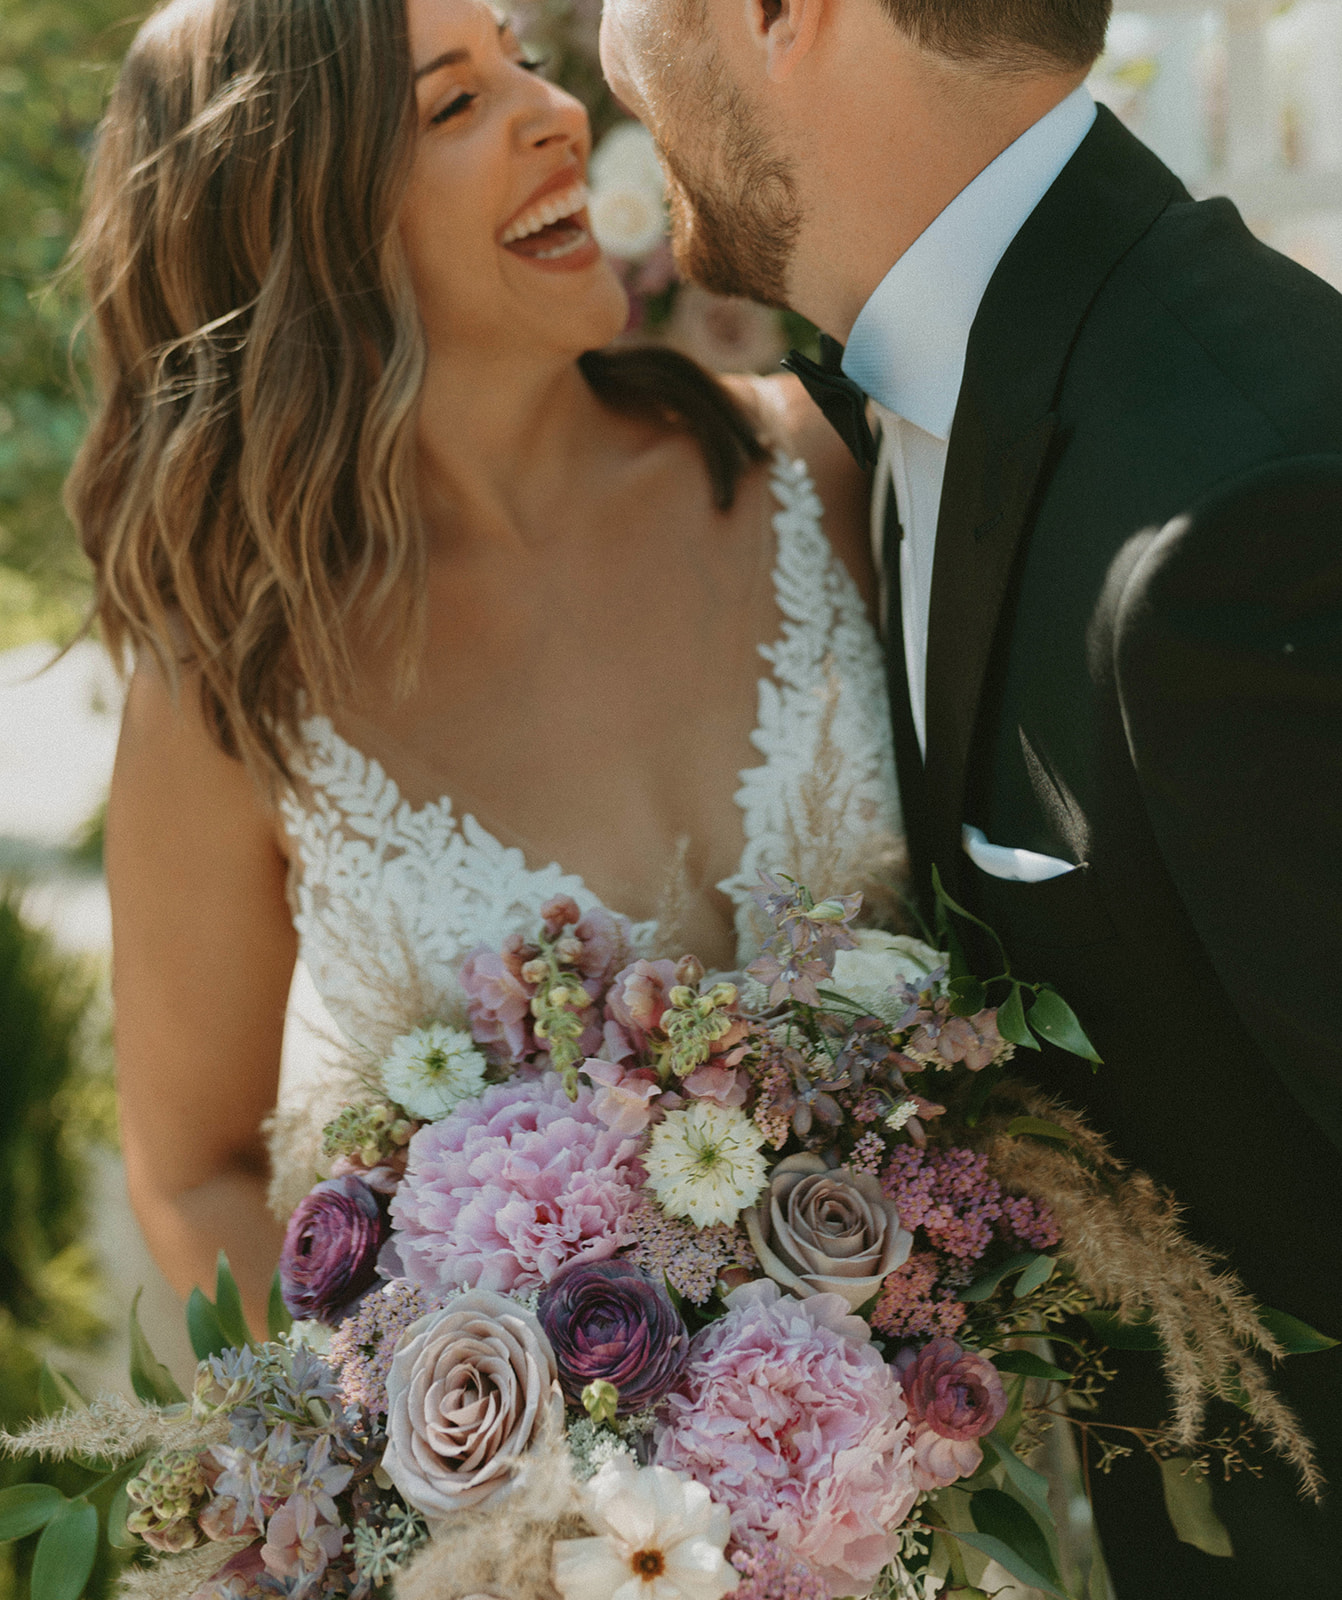 Summer bridal bouquet inspiration featuring mauve, gold and pink flowers